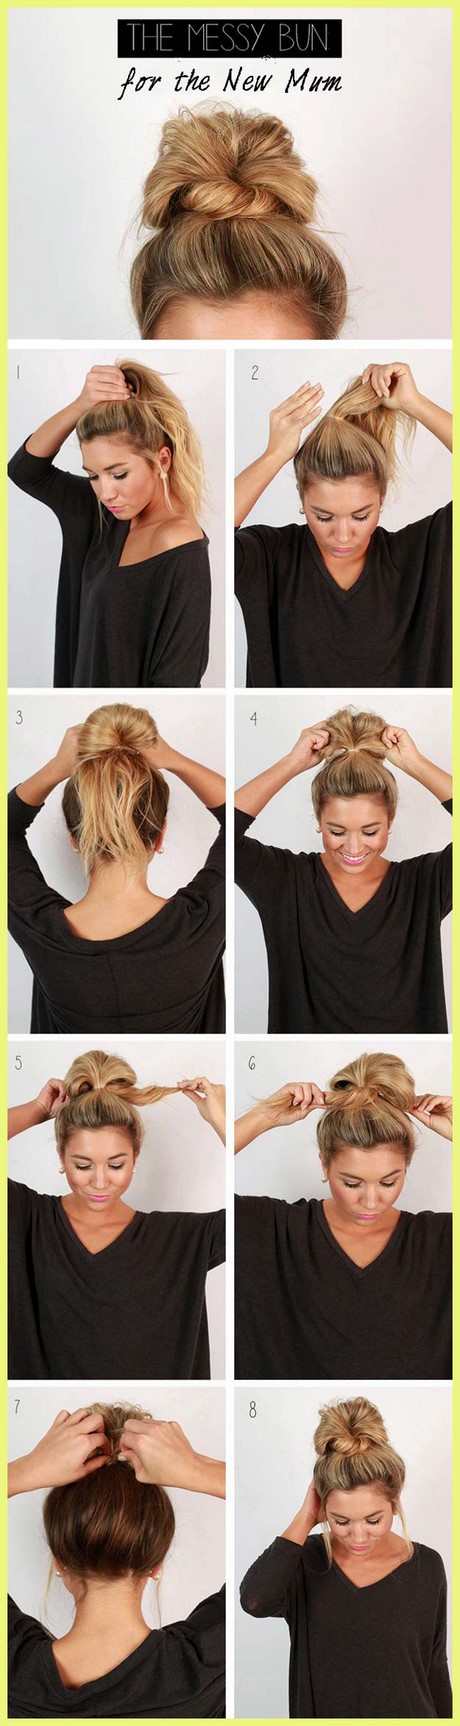 Quick easy hairstyles for shoulder length hair quick-easy-hairstyles-for-shoulder-length-hair-60_13